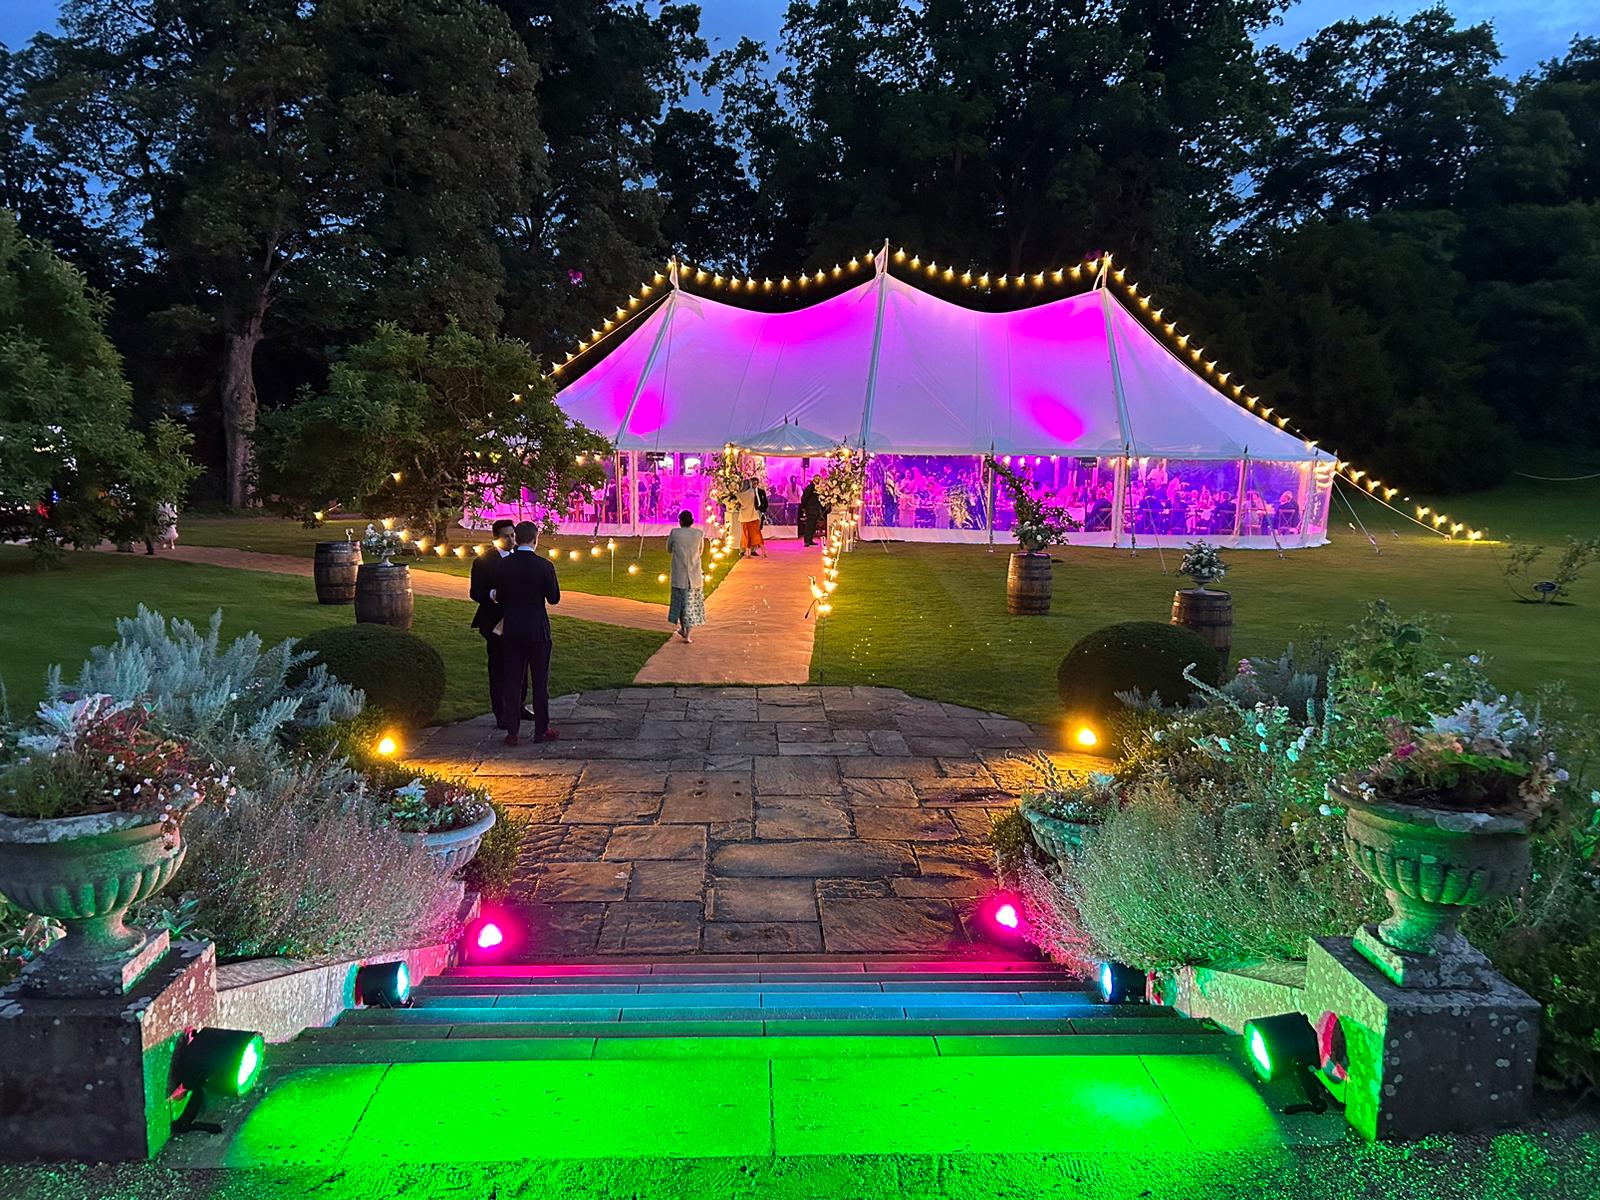 A traditional pole wedding equipped with fairy and coloured lighting